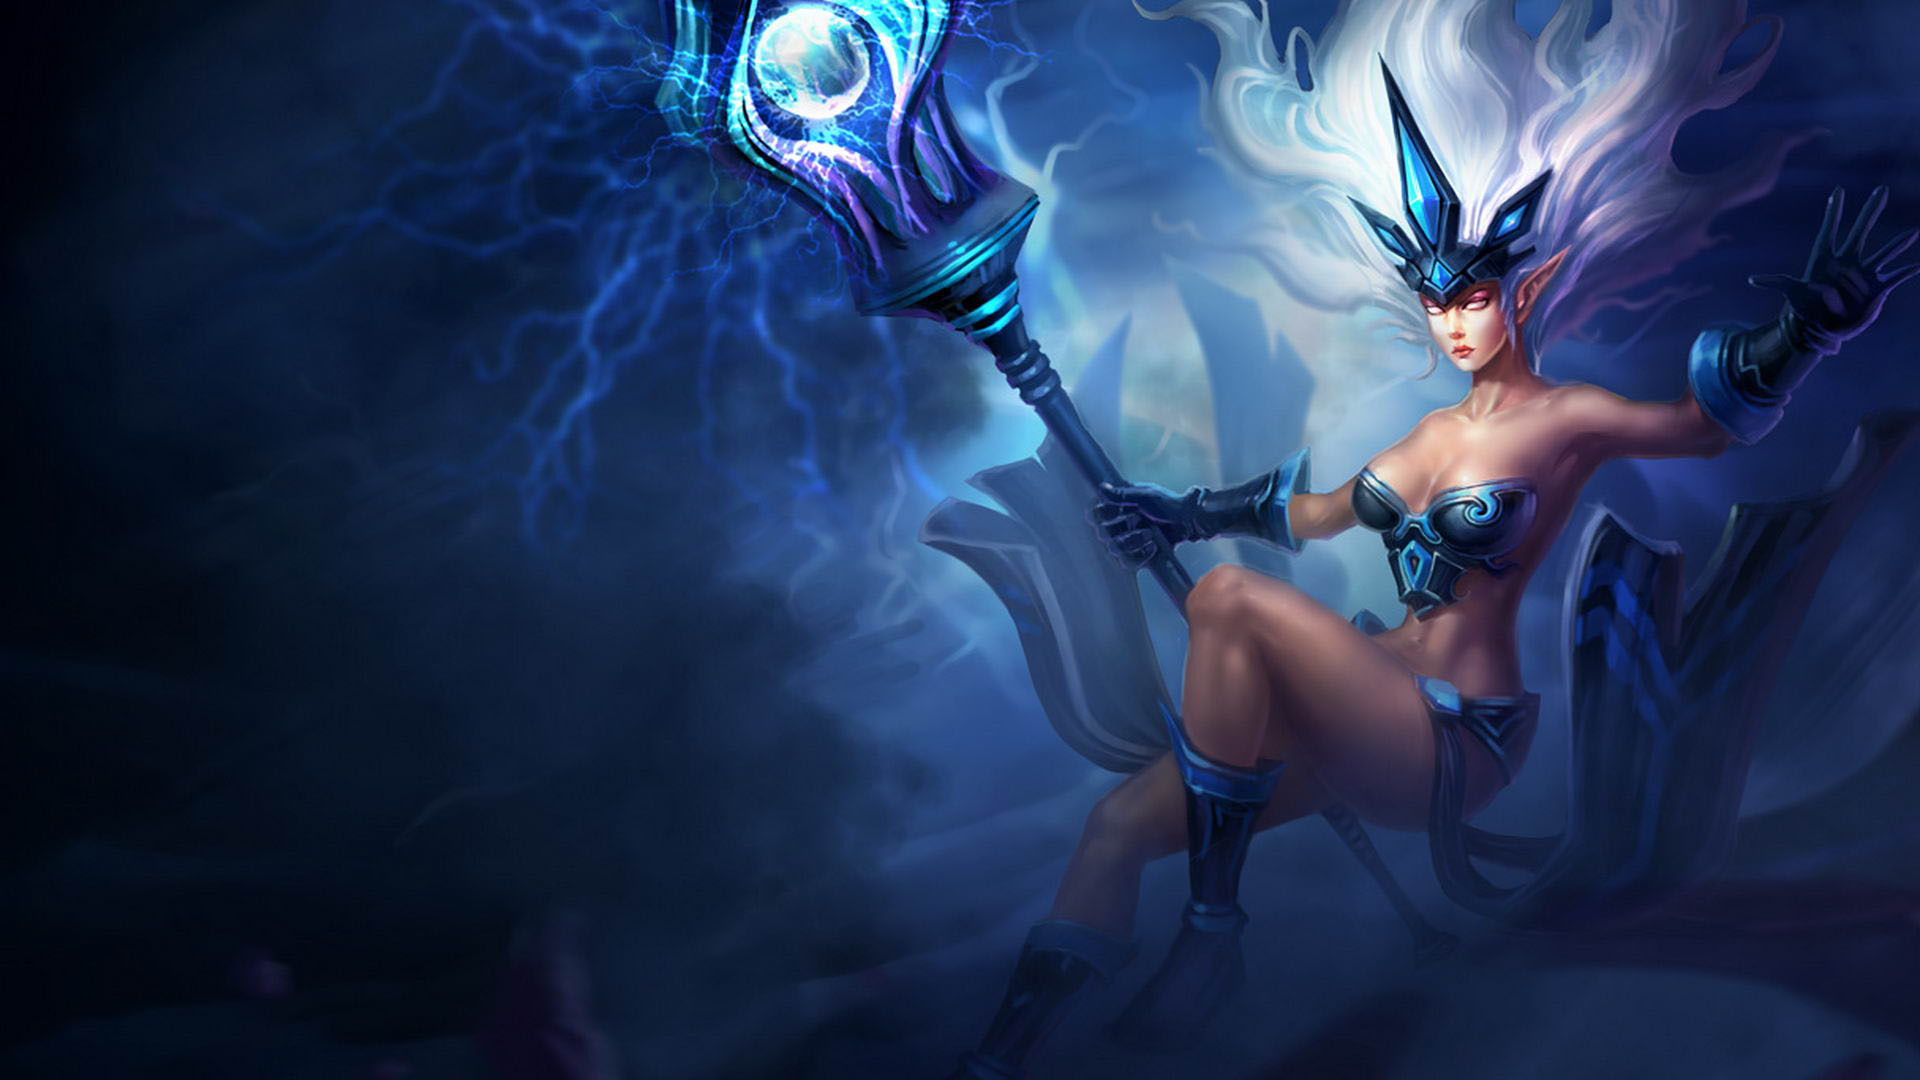 My skin collection grows - League of Legends - VG Community Forums